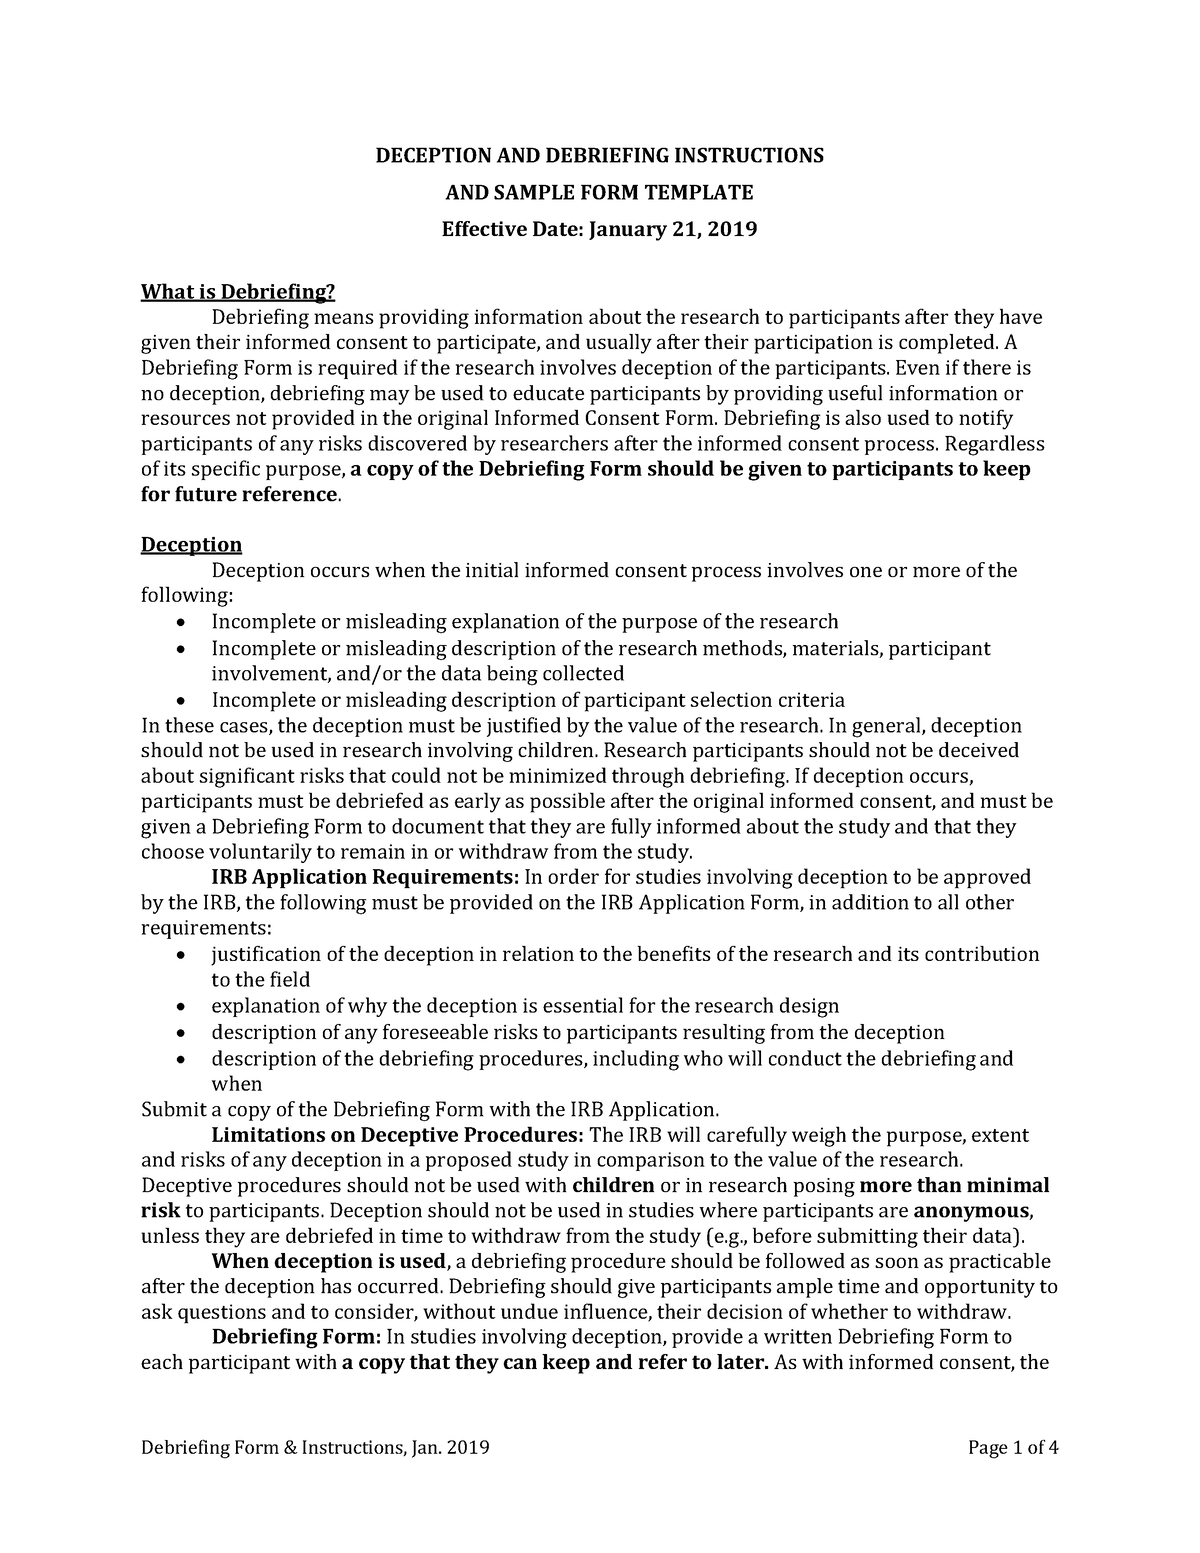 Debriefing Form For Course Deception And Debriefing Instructions And